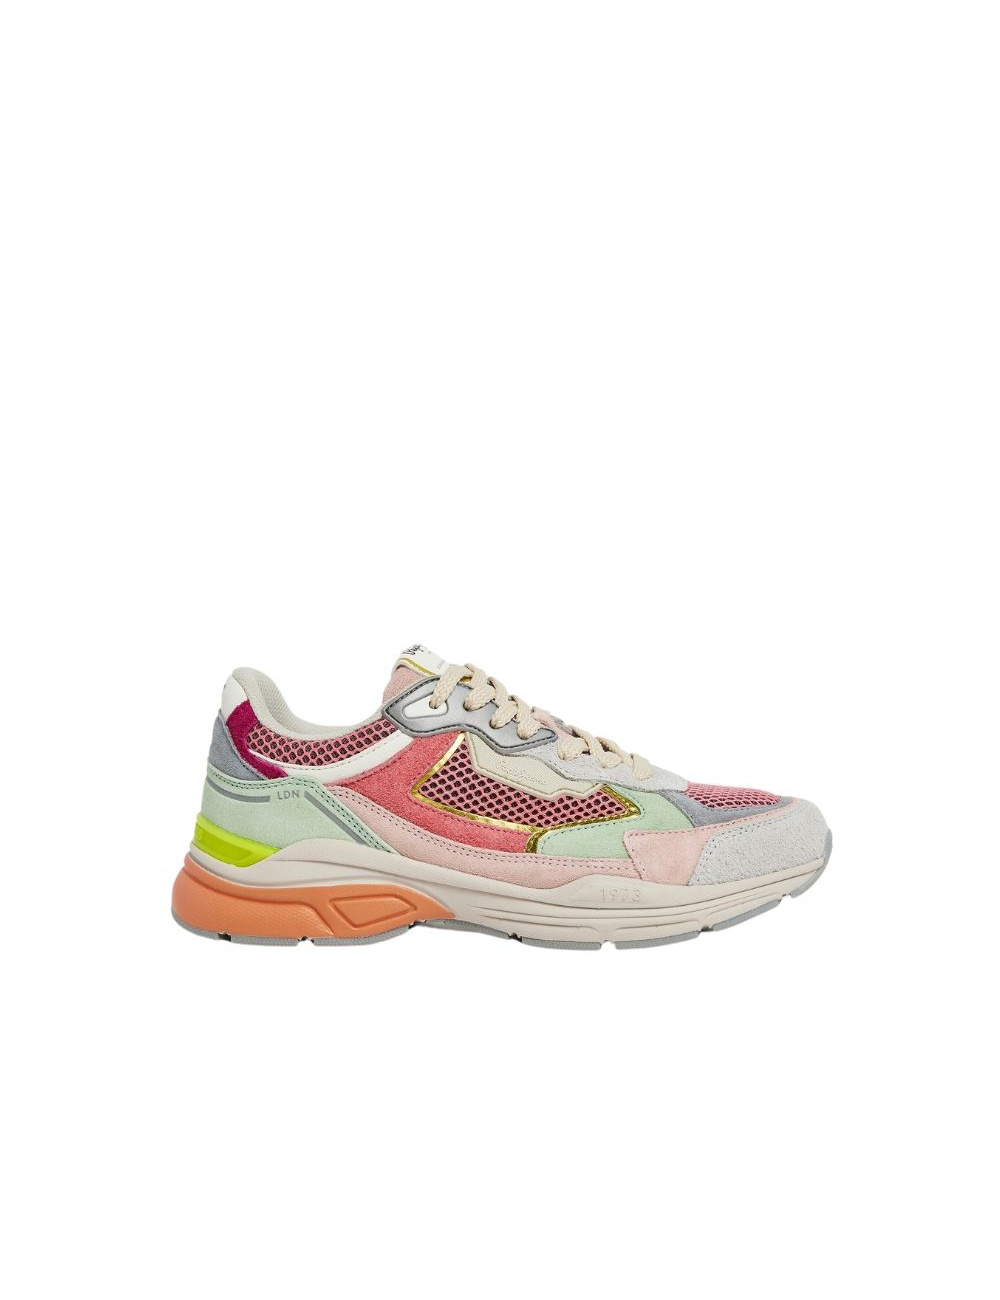 PEPE JEANS ZAPATILLA DEPORTIVE DAVE RISE PLS60003 MUJER